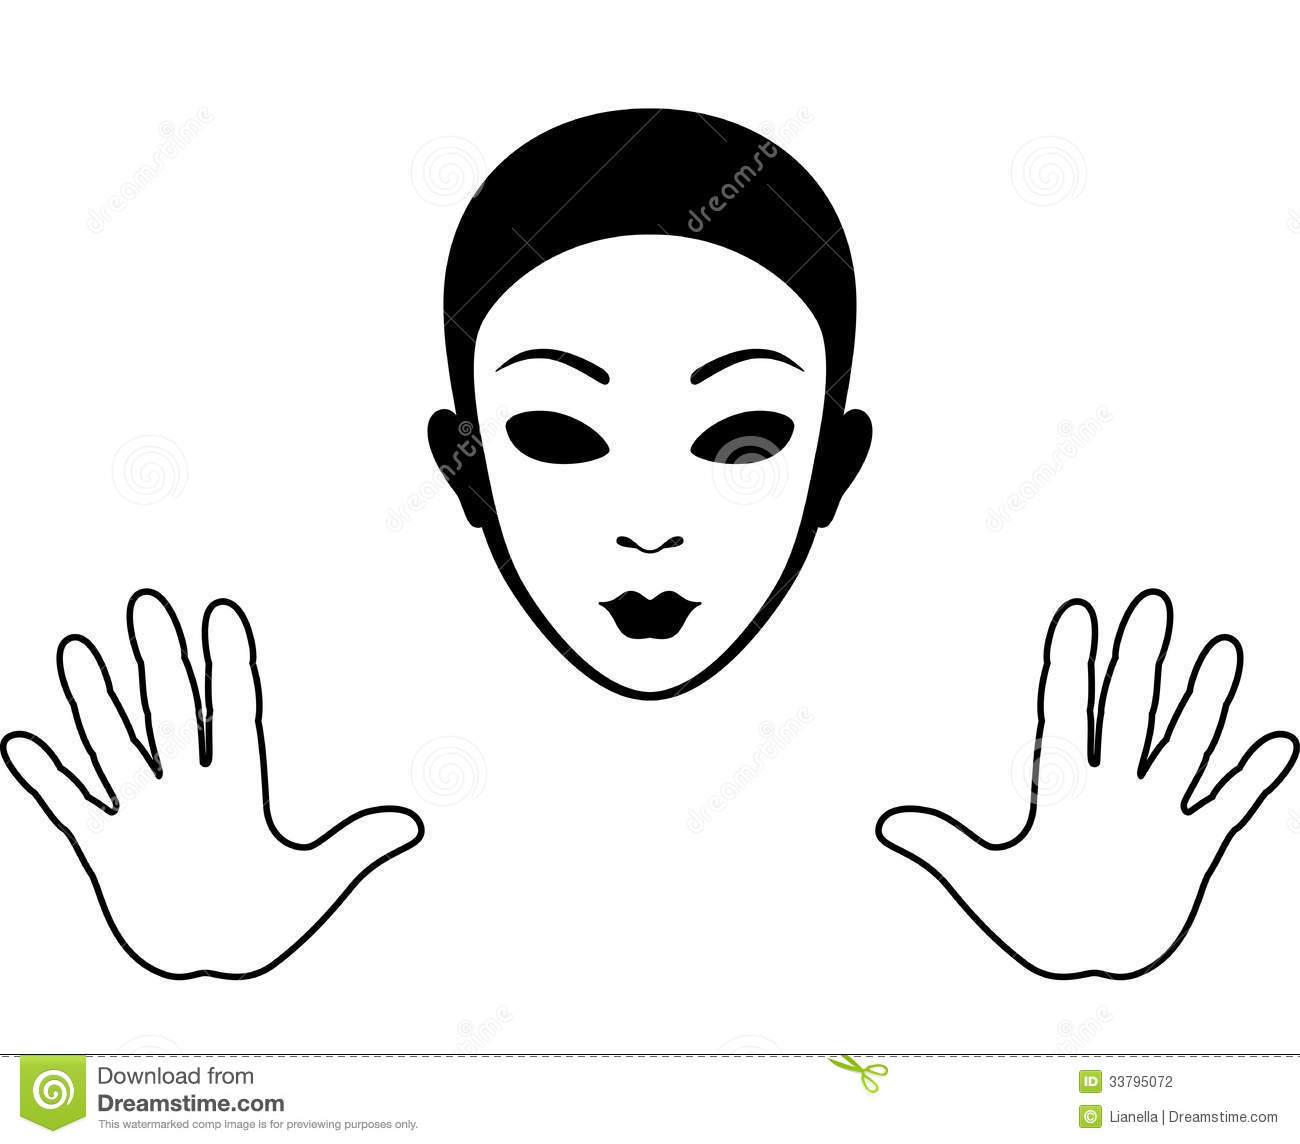 Mime Mask And Hands Silhouette Stock Photography   Image  33795072